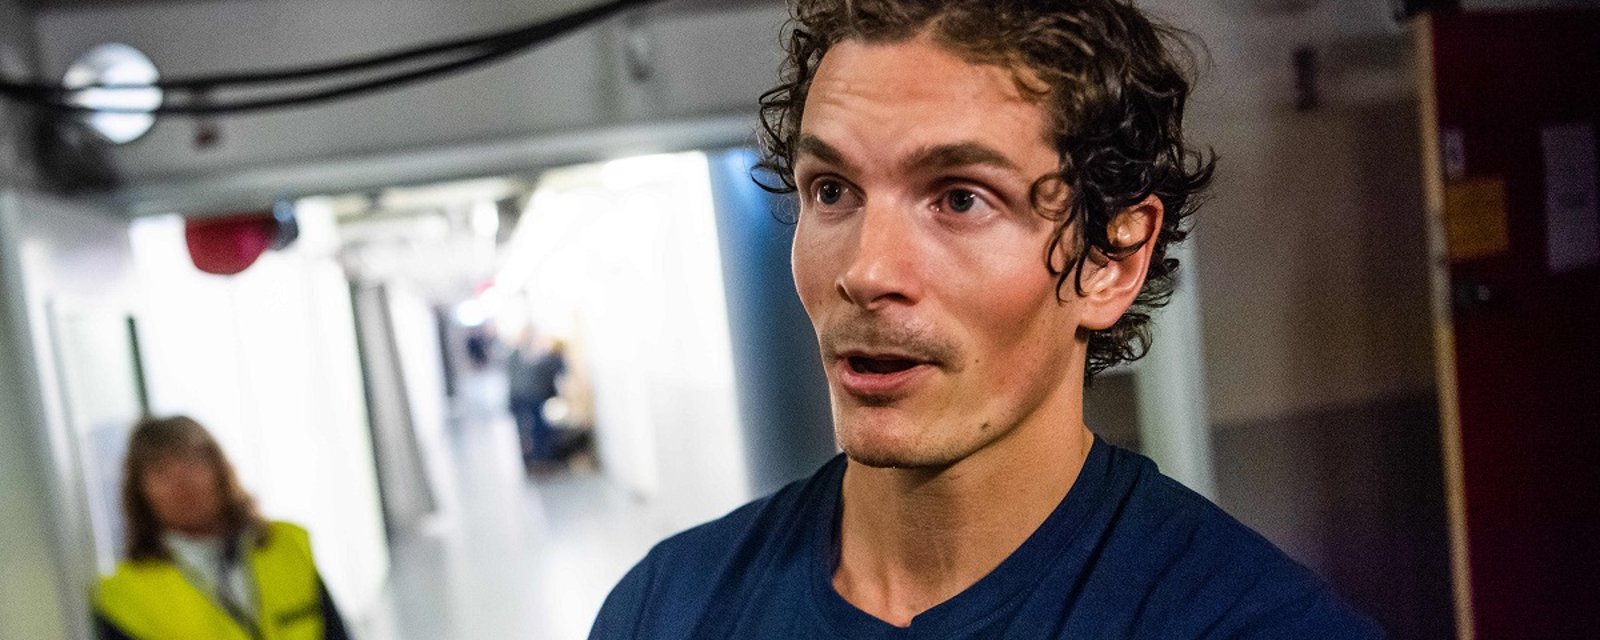 Loui Eriksson throws his coach under the bus after another bad season.